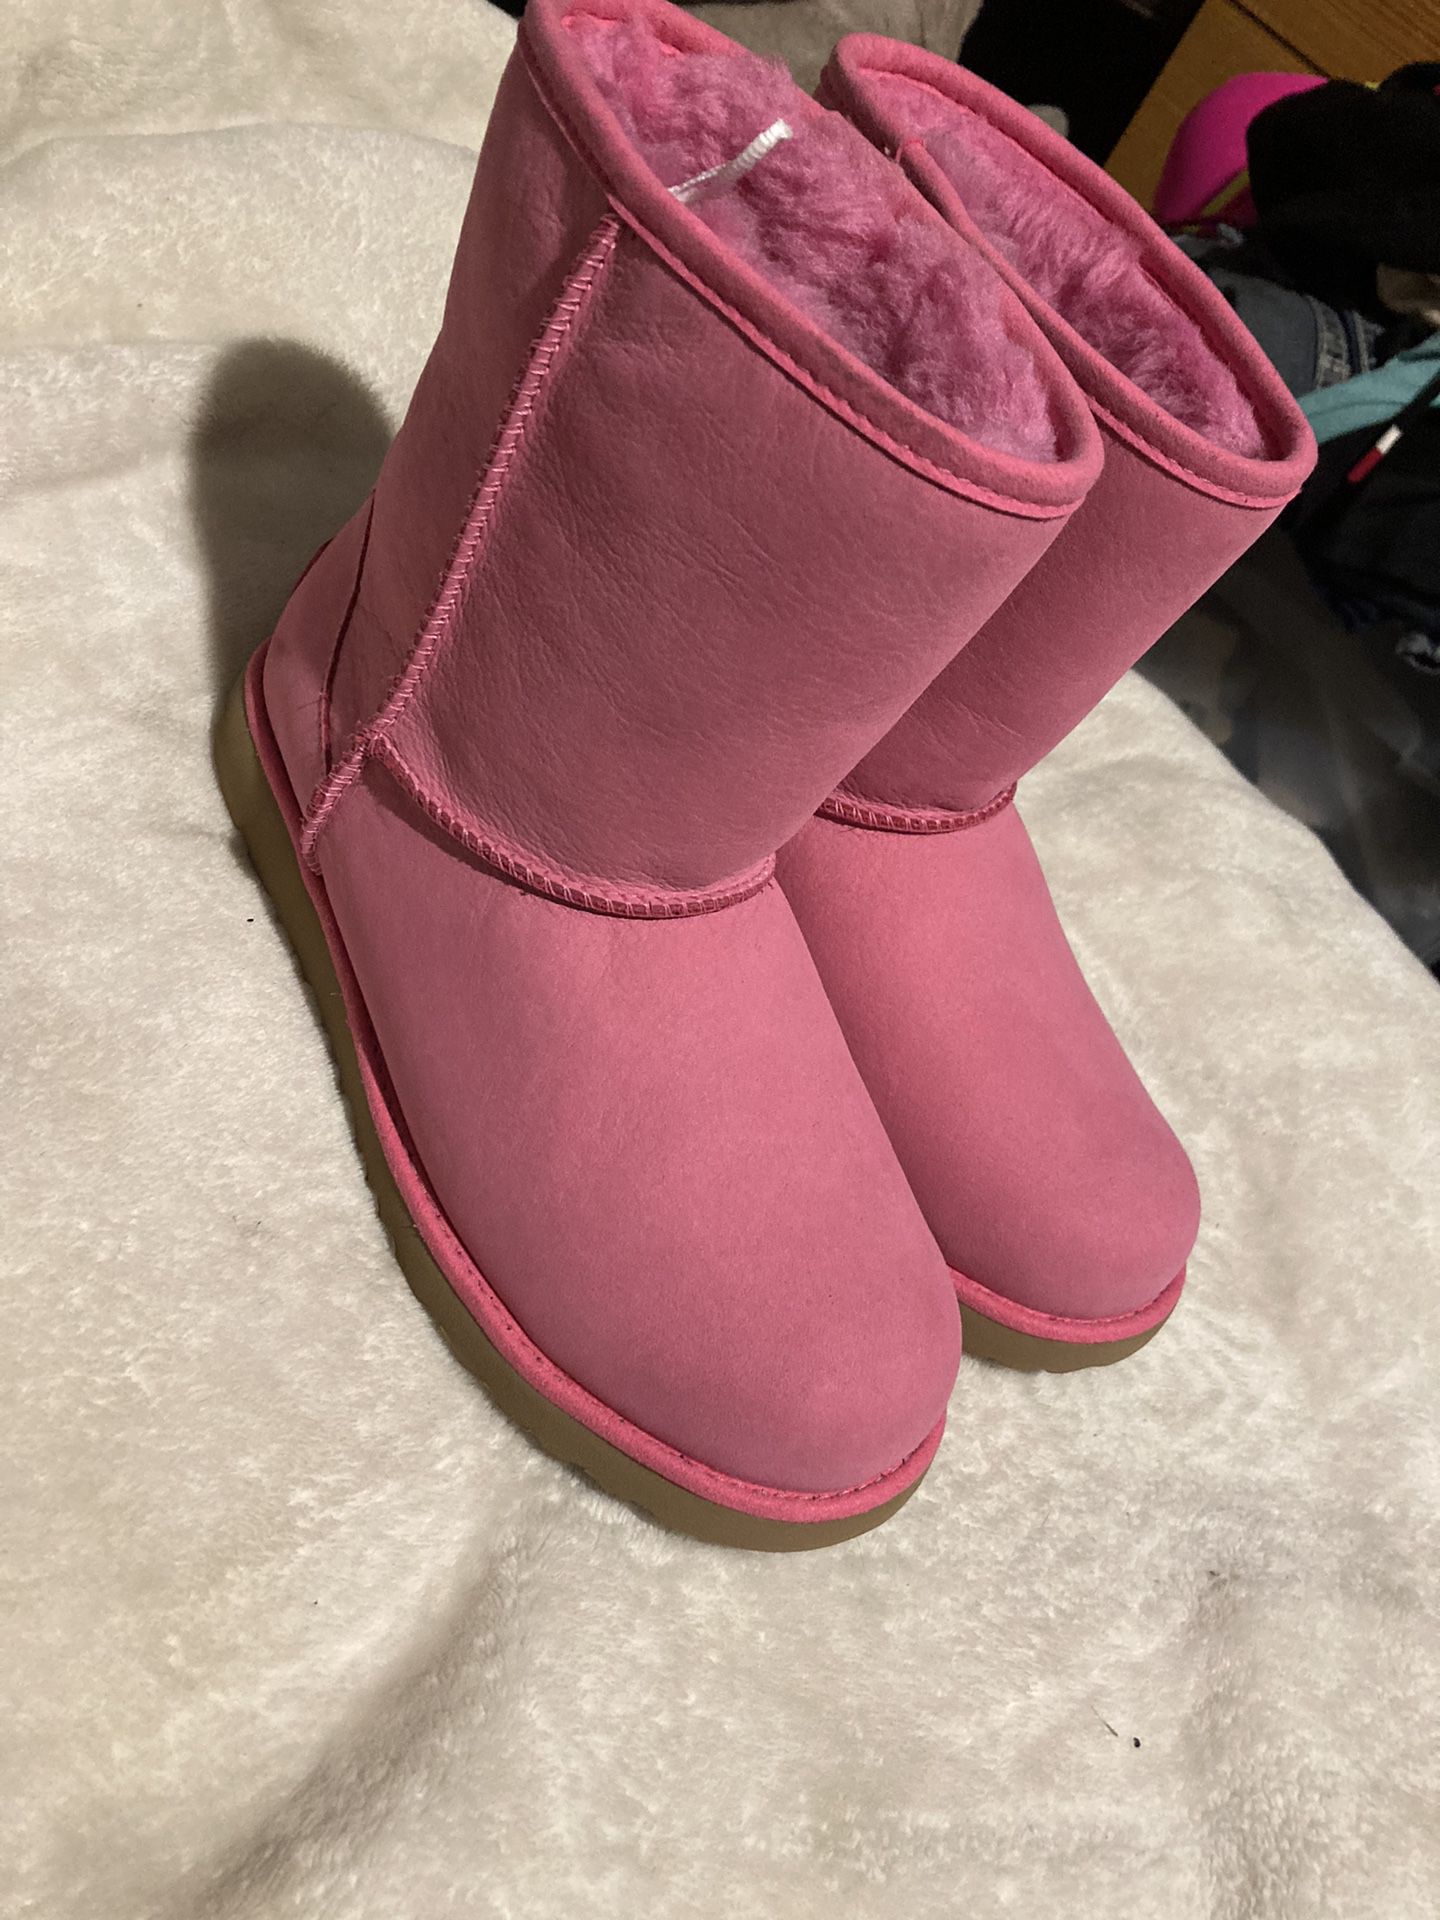 Brand New Pink UGG Boots 